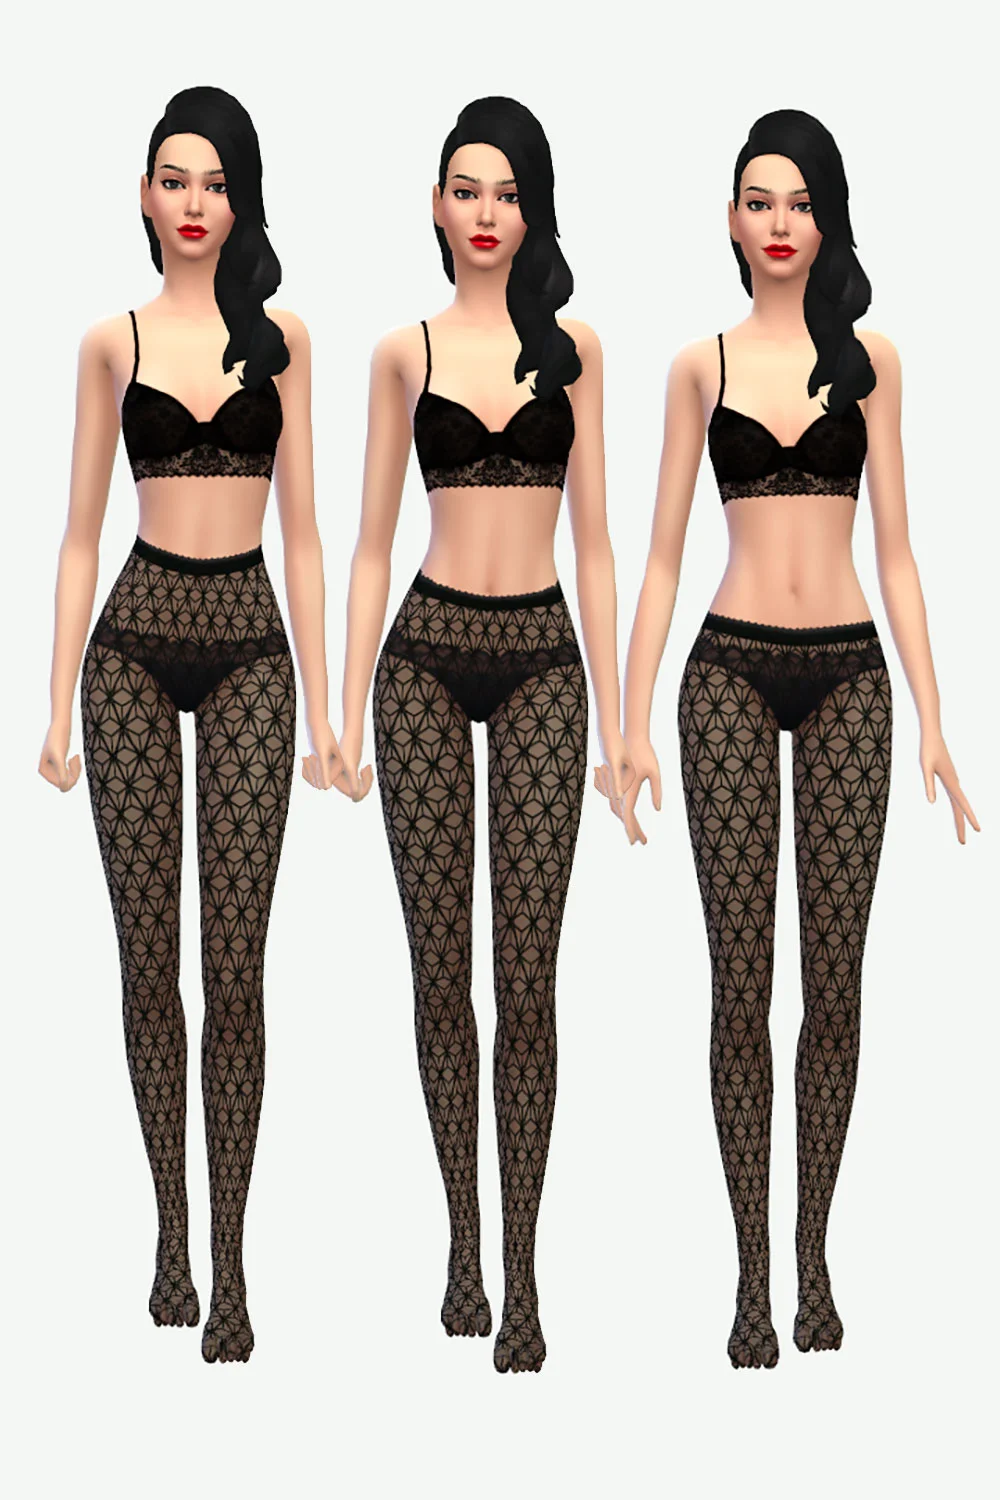 The Sims 4 Gucci Tights